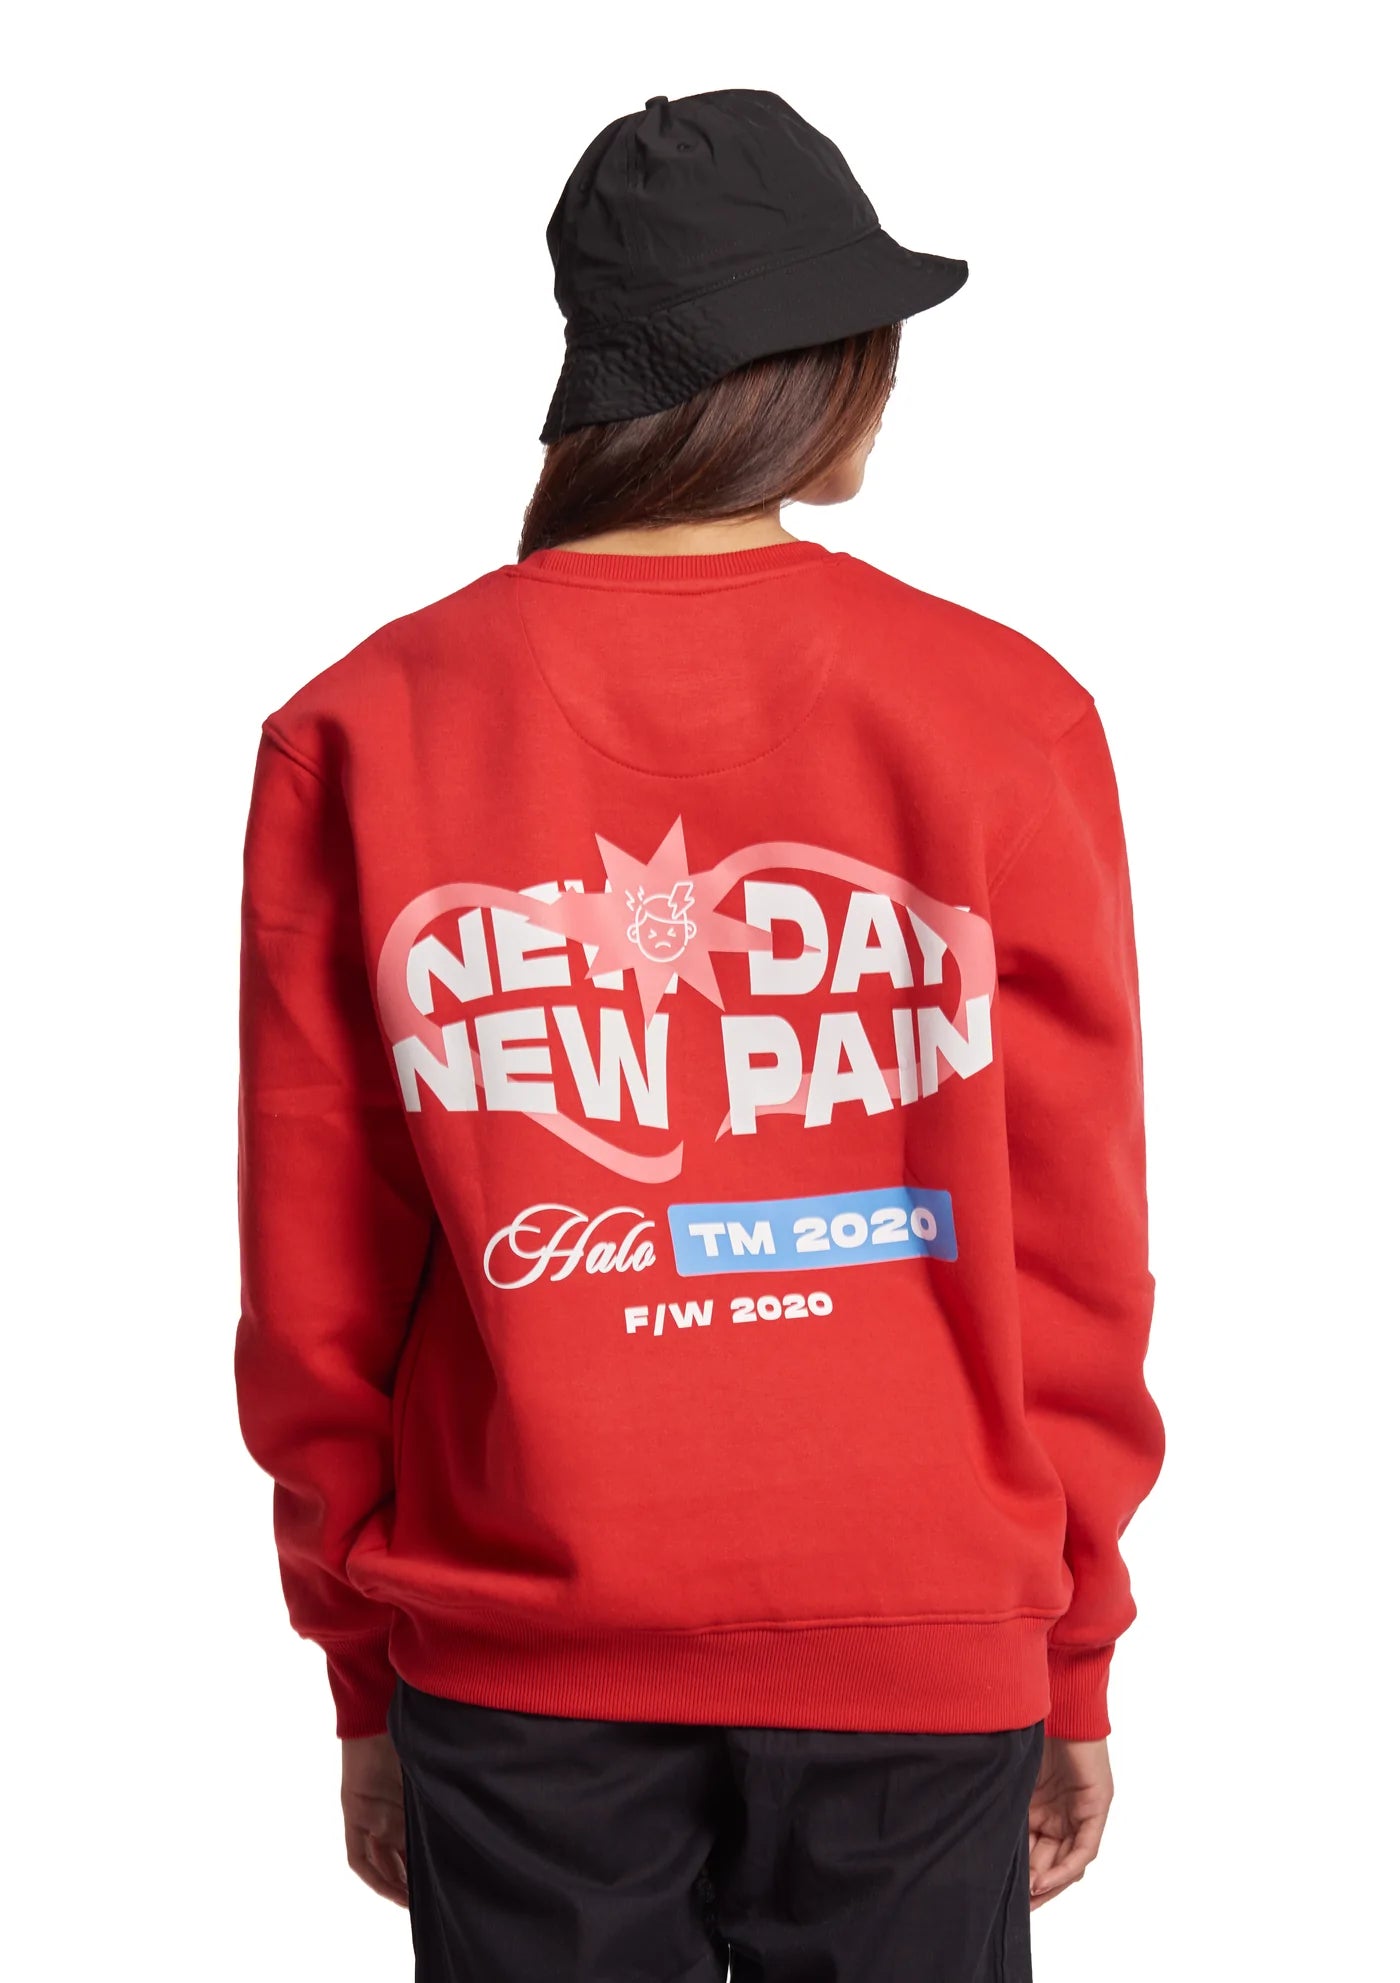 Halo Effect 'New Day New Pain' Red Sweatshirt